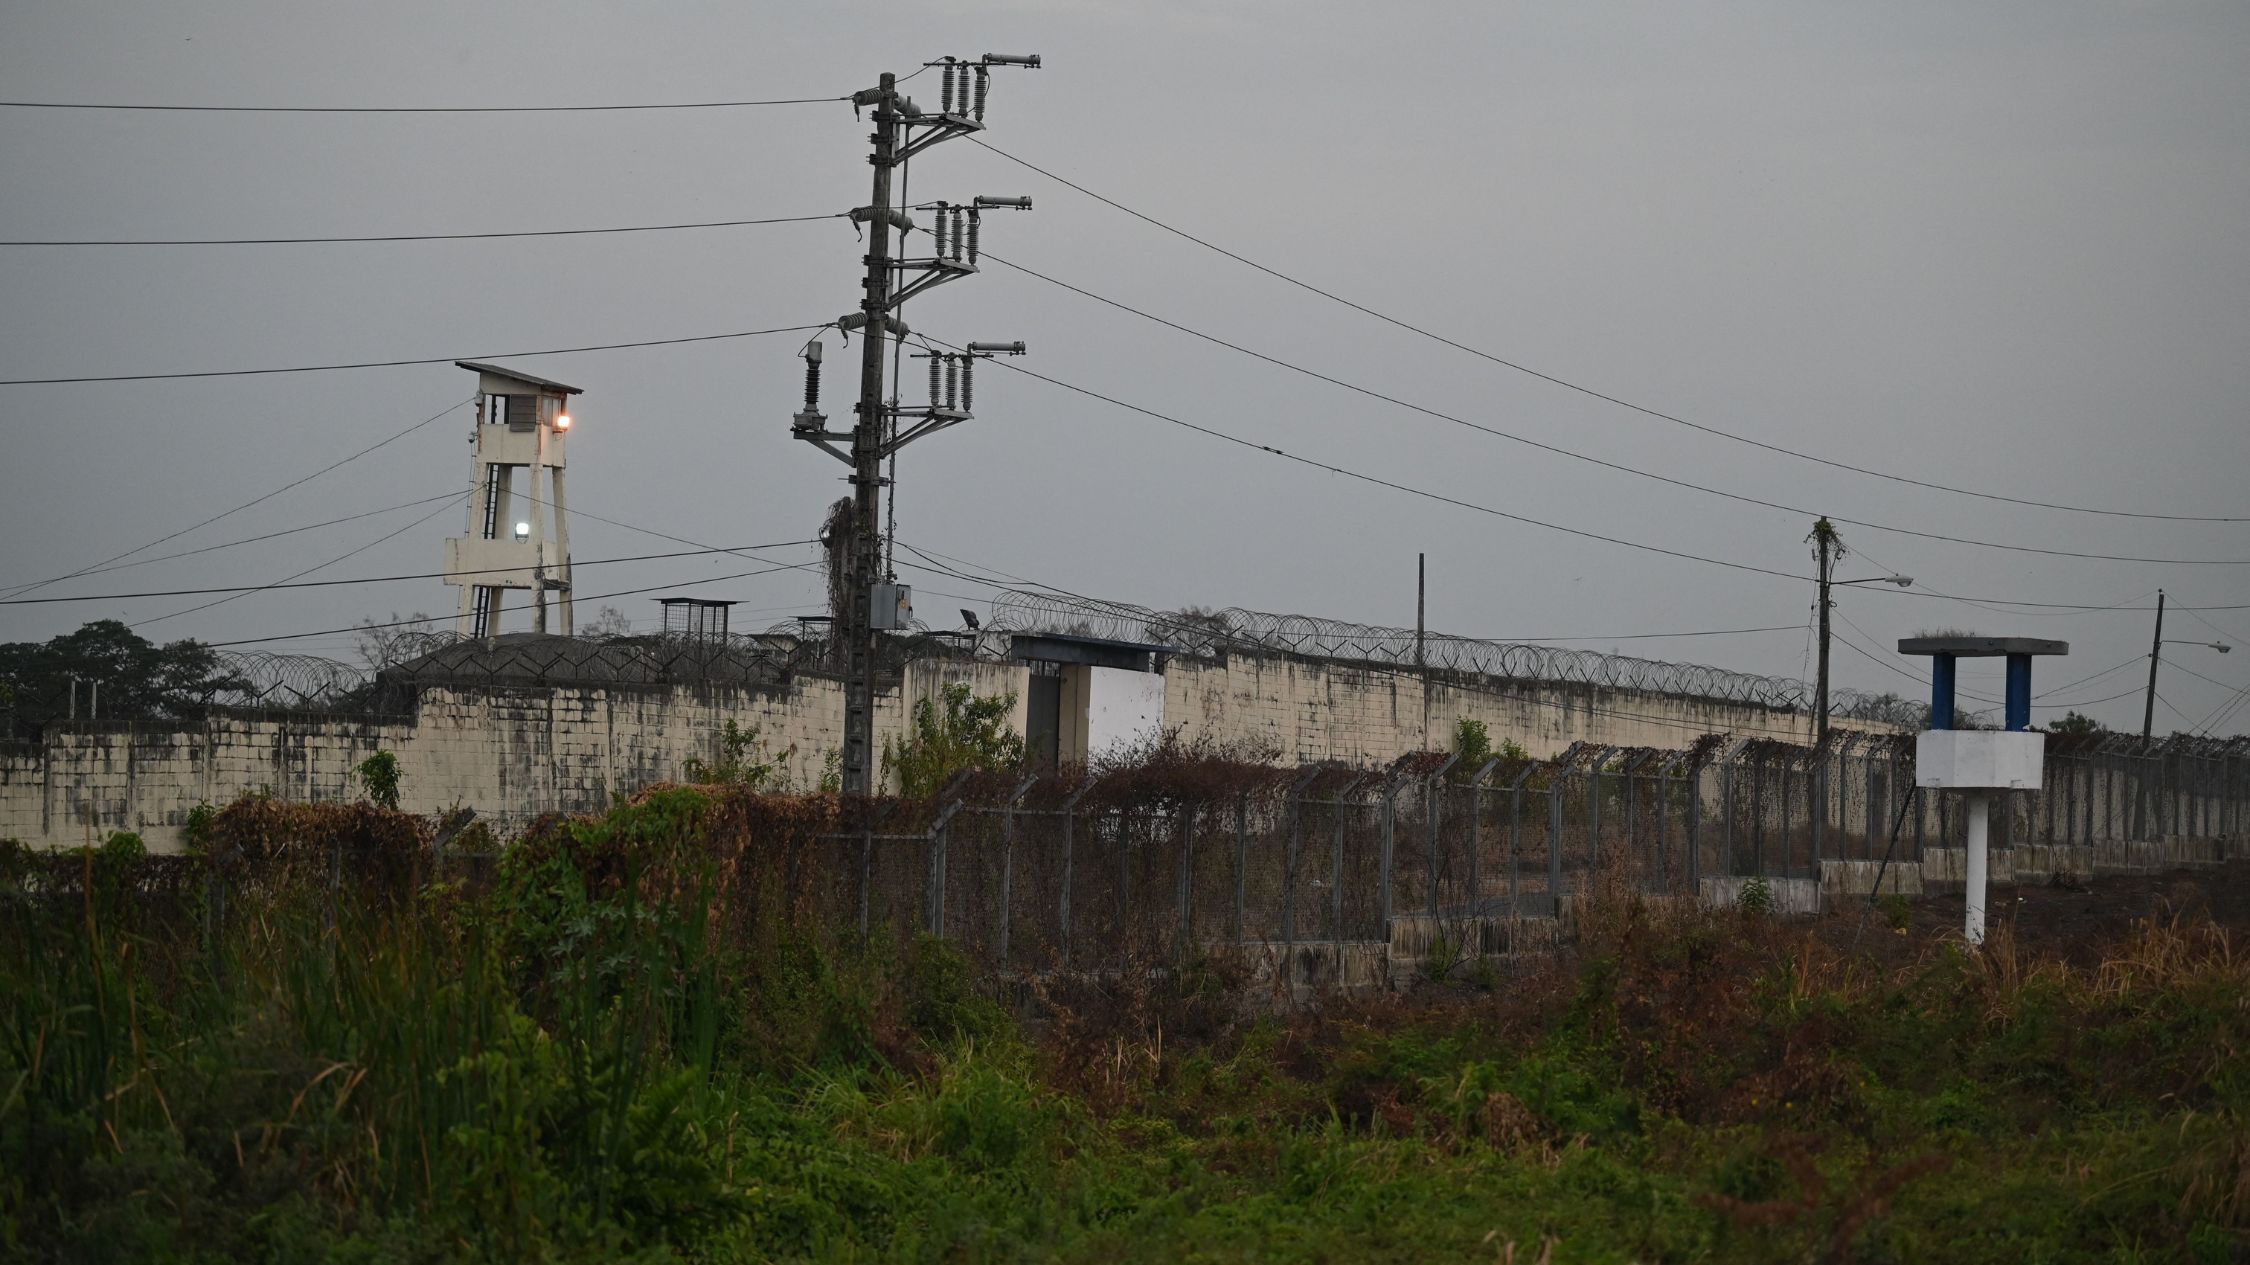 The prosecutor’s office is investigating the deaths of six inmates at Guayaquil prison